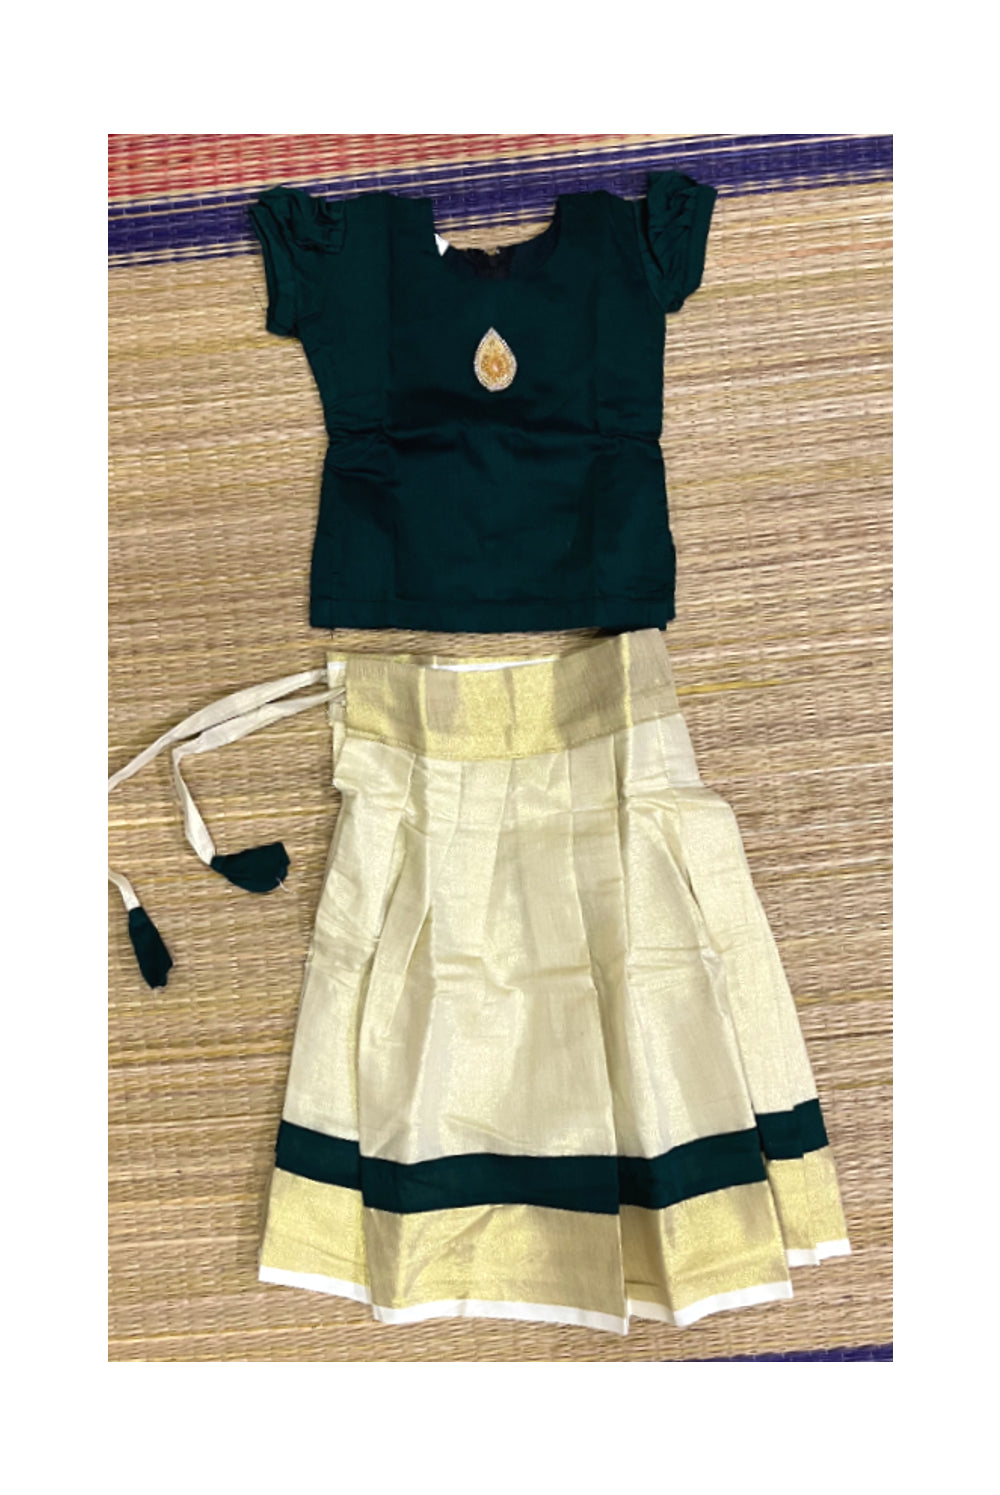 Southloom Kerala Pavada Blouse with Green Bead Work Design (Age - 2 Year)